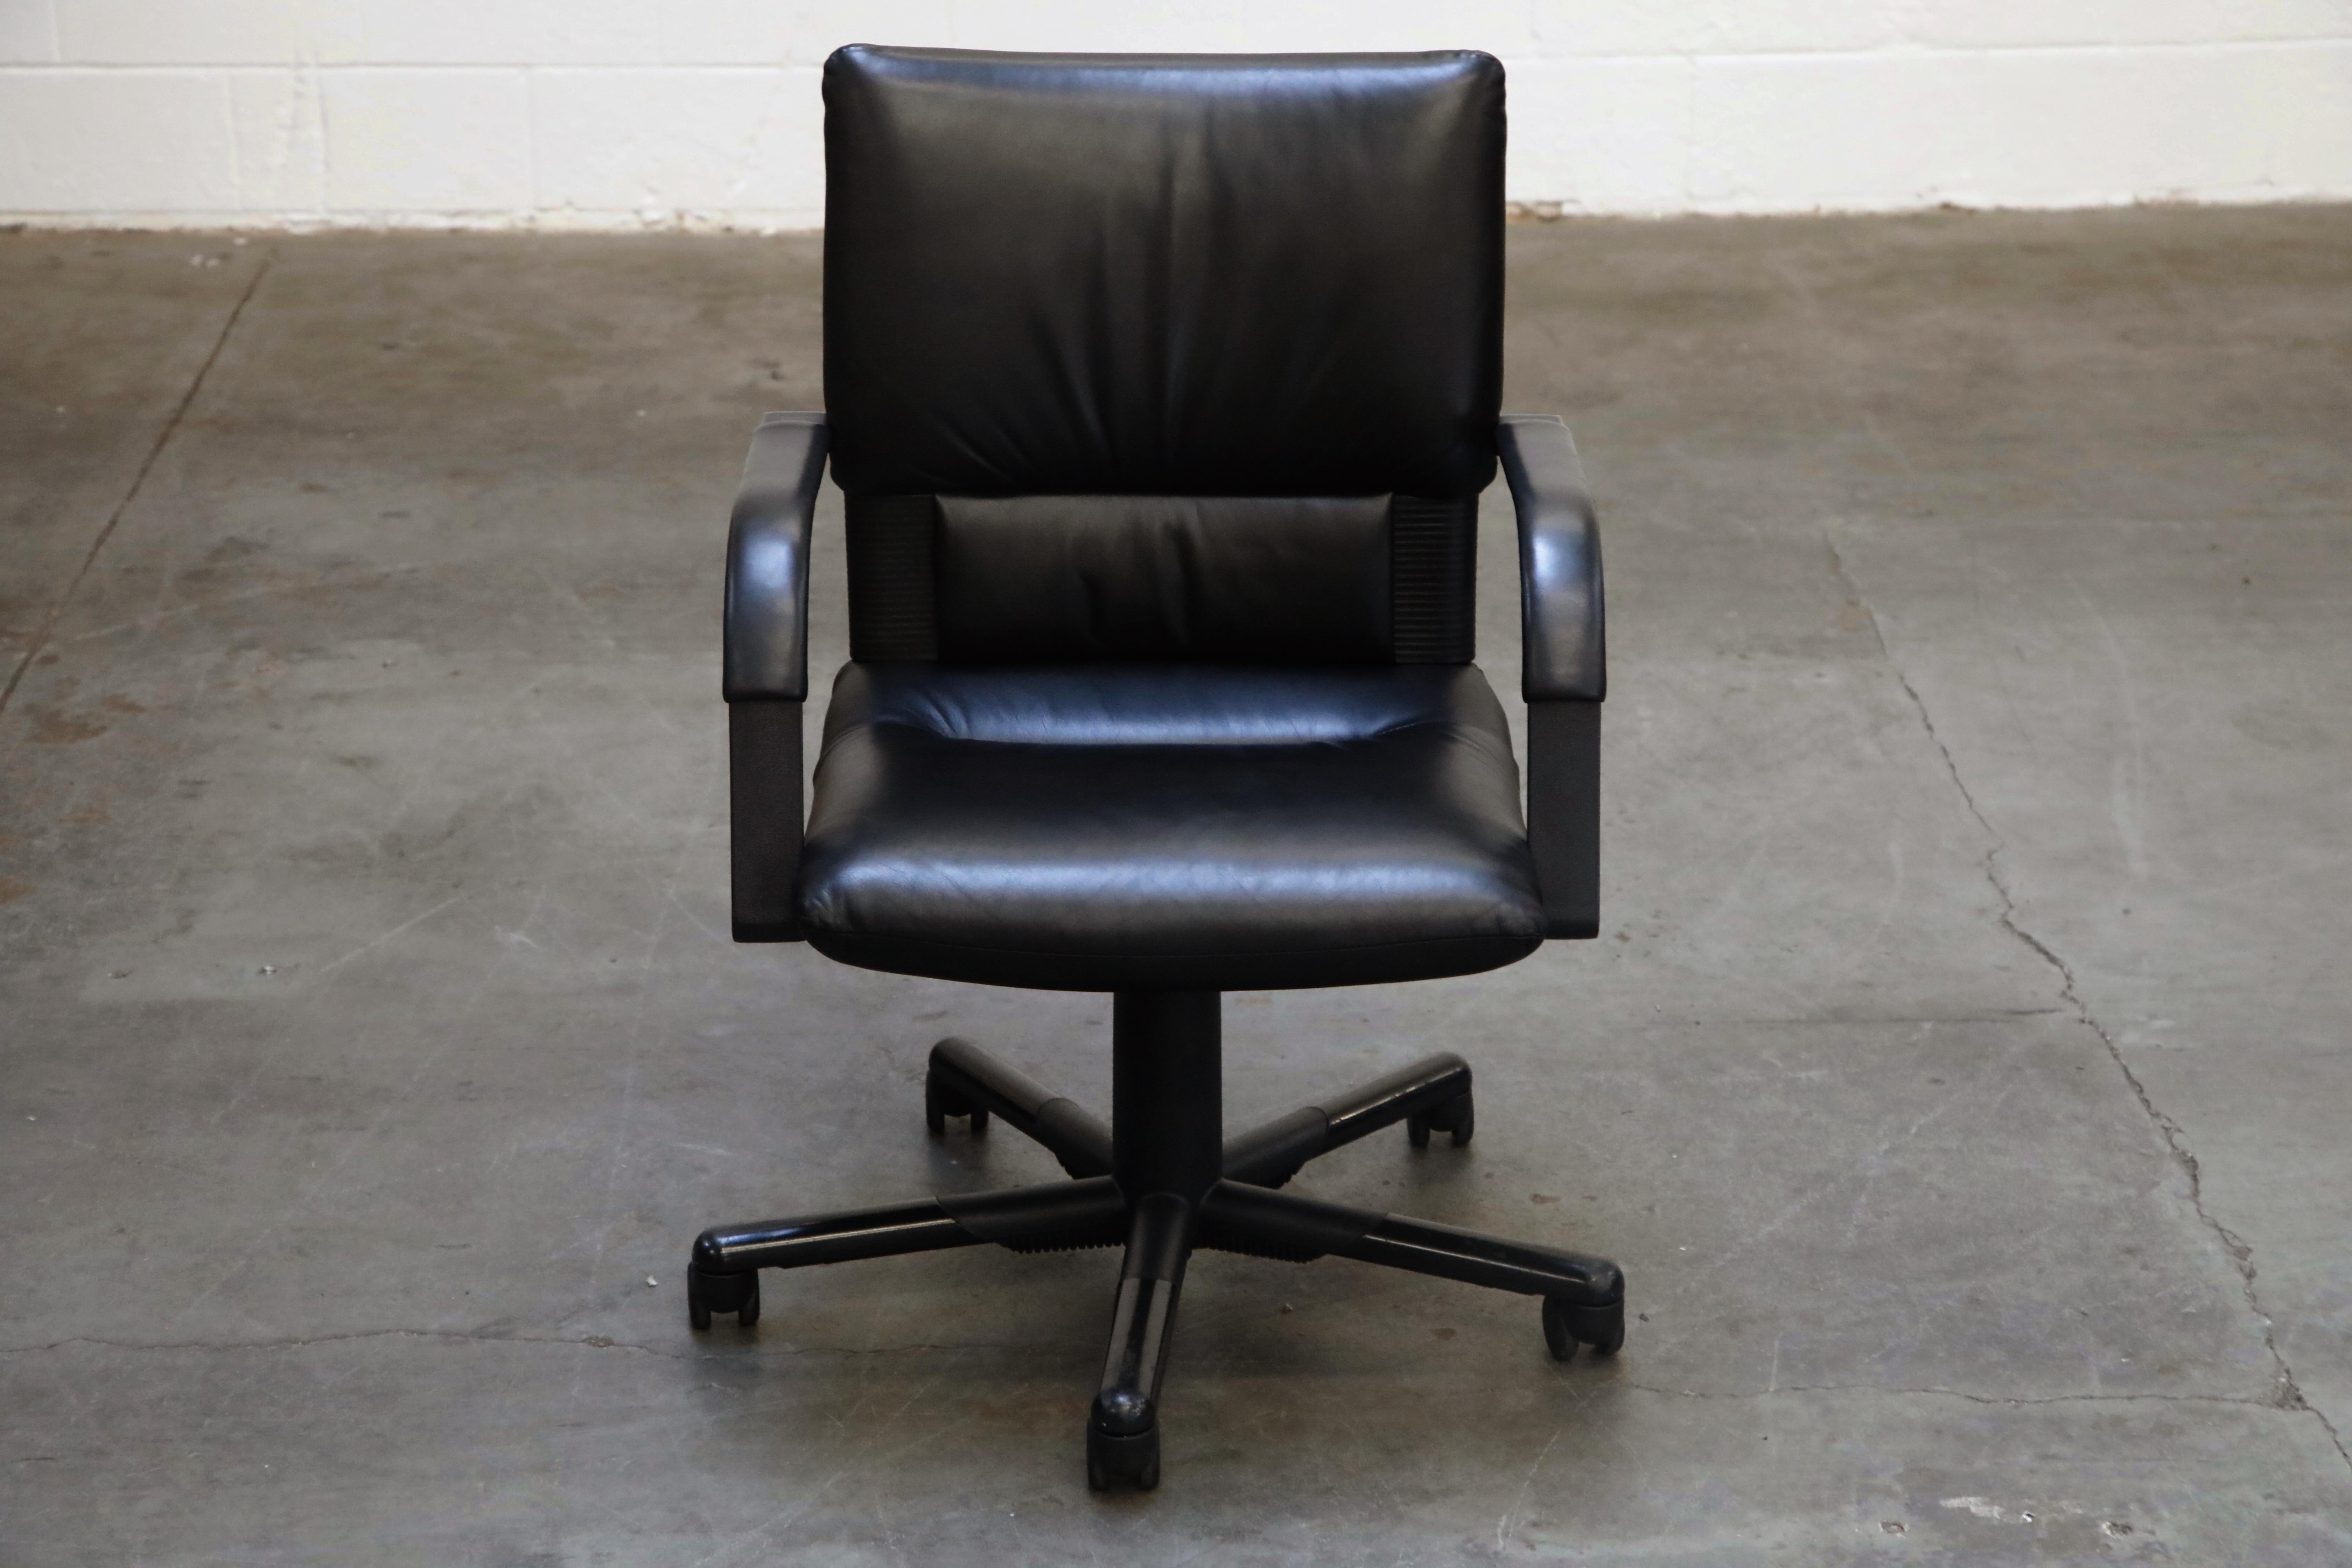 1990s office chair